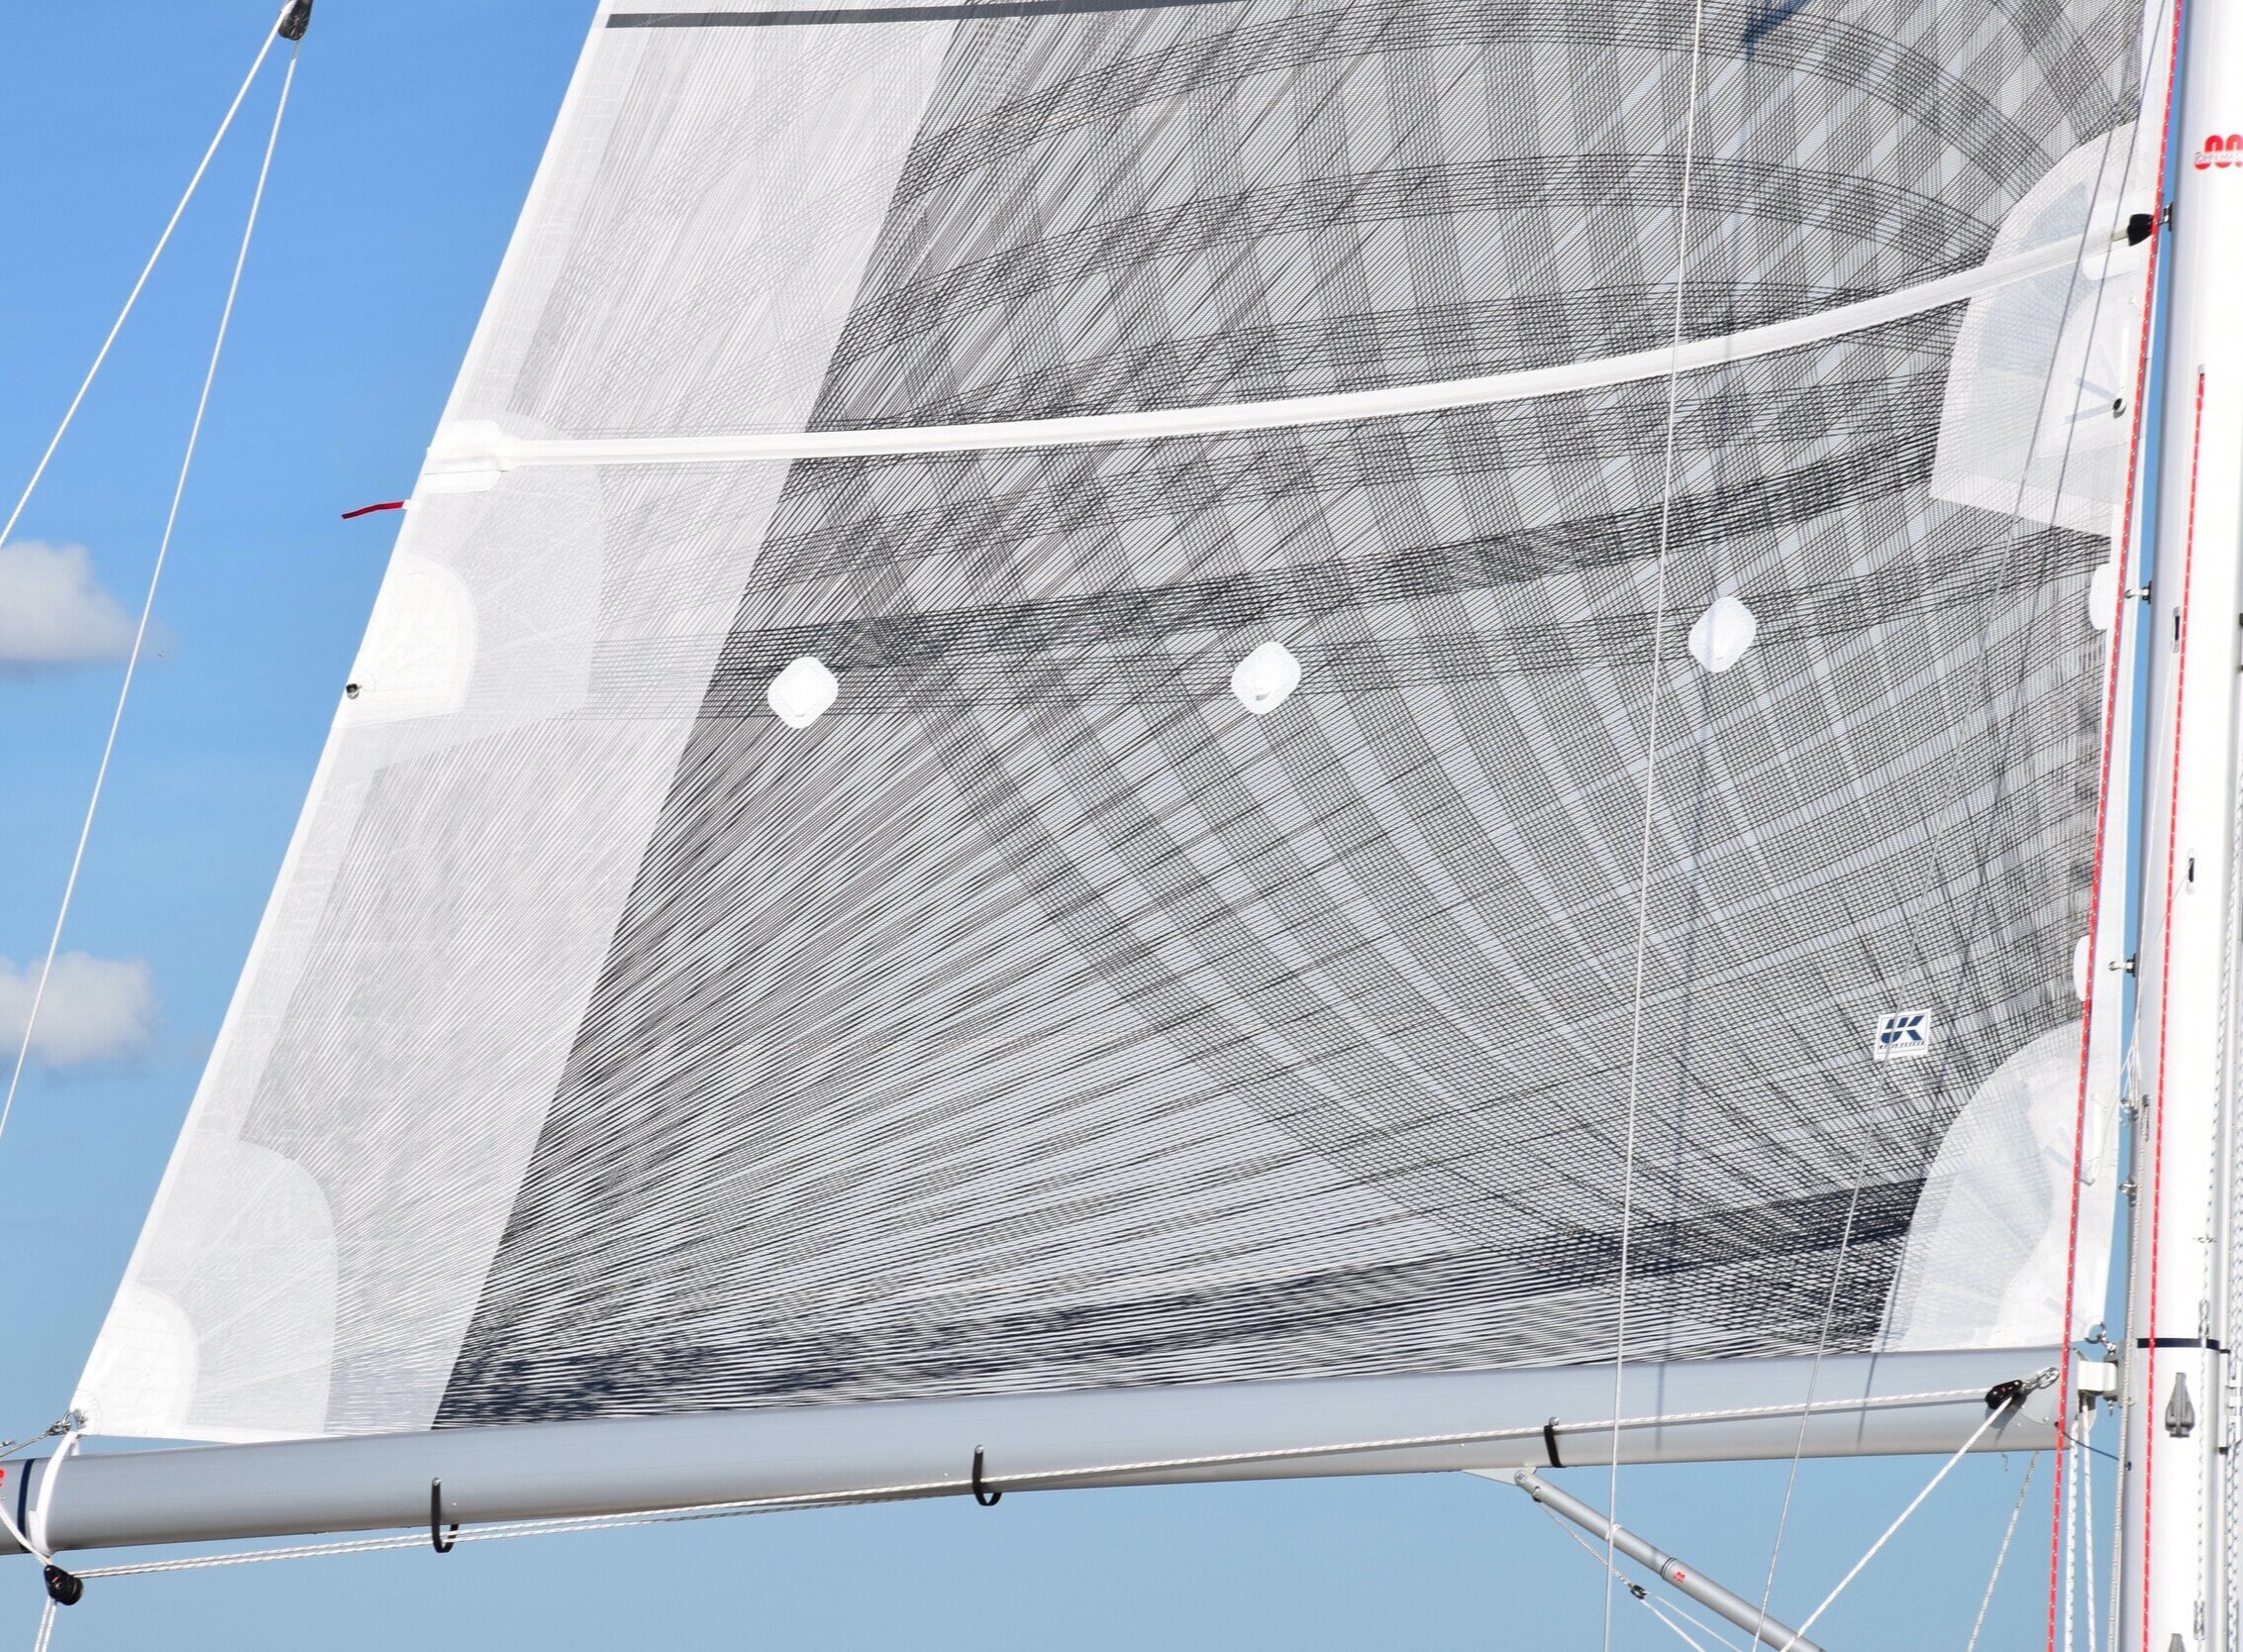 Click to enlarge to see how dense the carbon fibers are on this Italia 12.98 X-Drive mainsail.